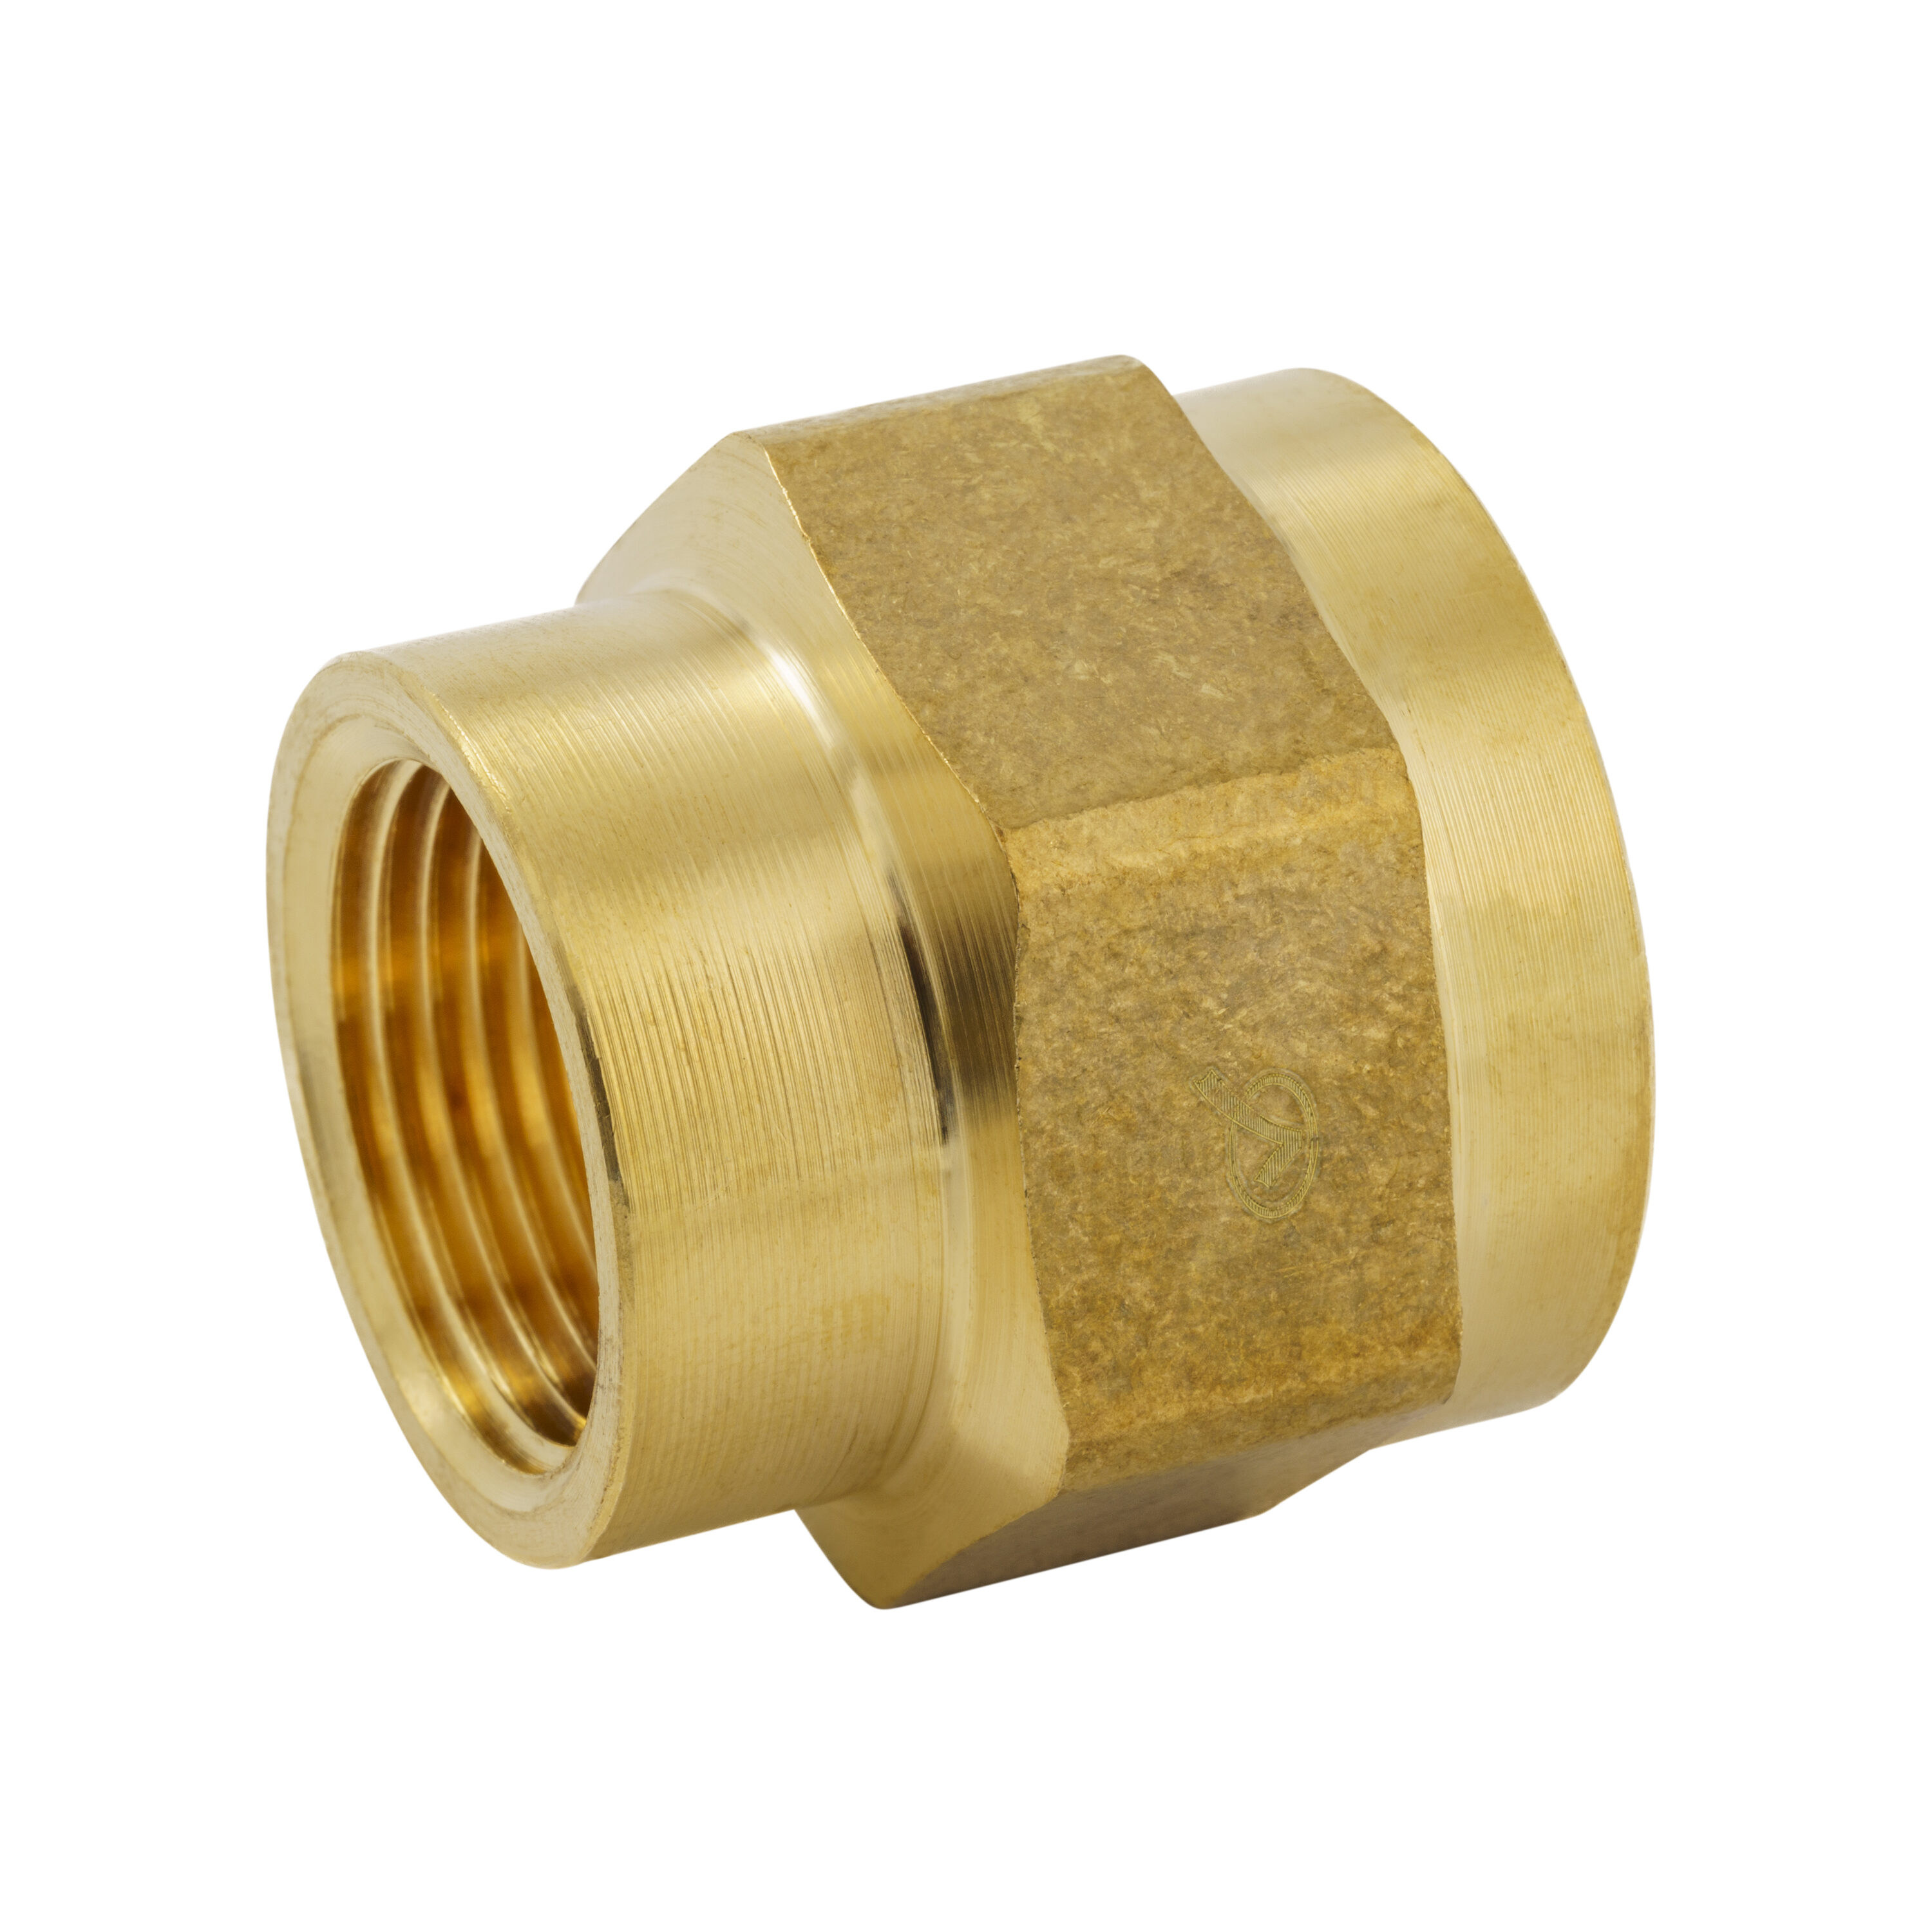 Legines Brass Compression 90 Degree Male Elbow Fitting, 3/16 Tube OD x  1/8 NPT Male Pipe, Pack of 2